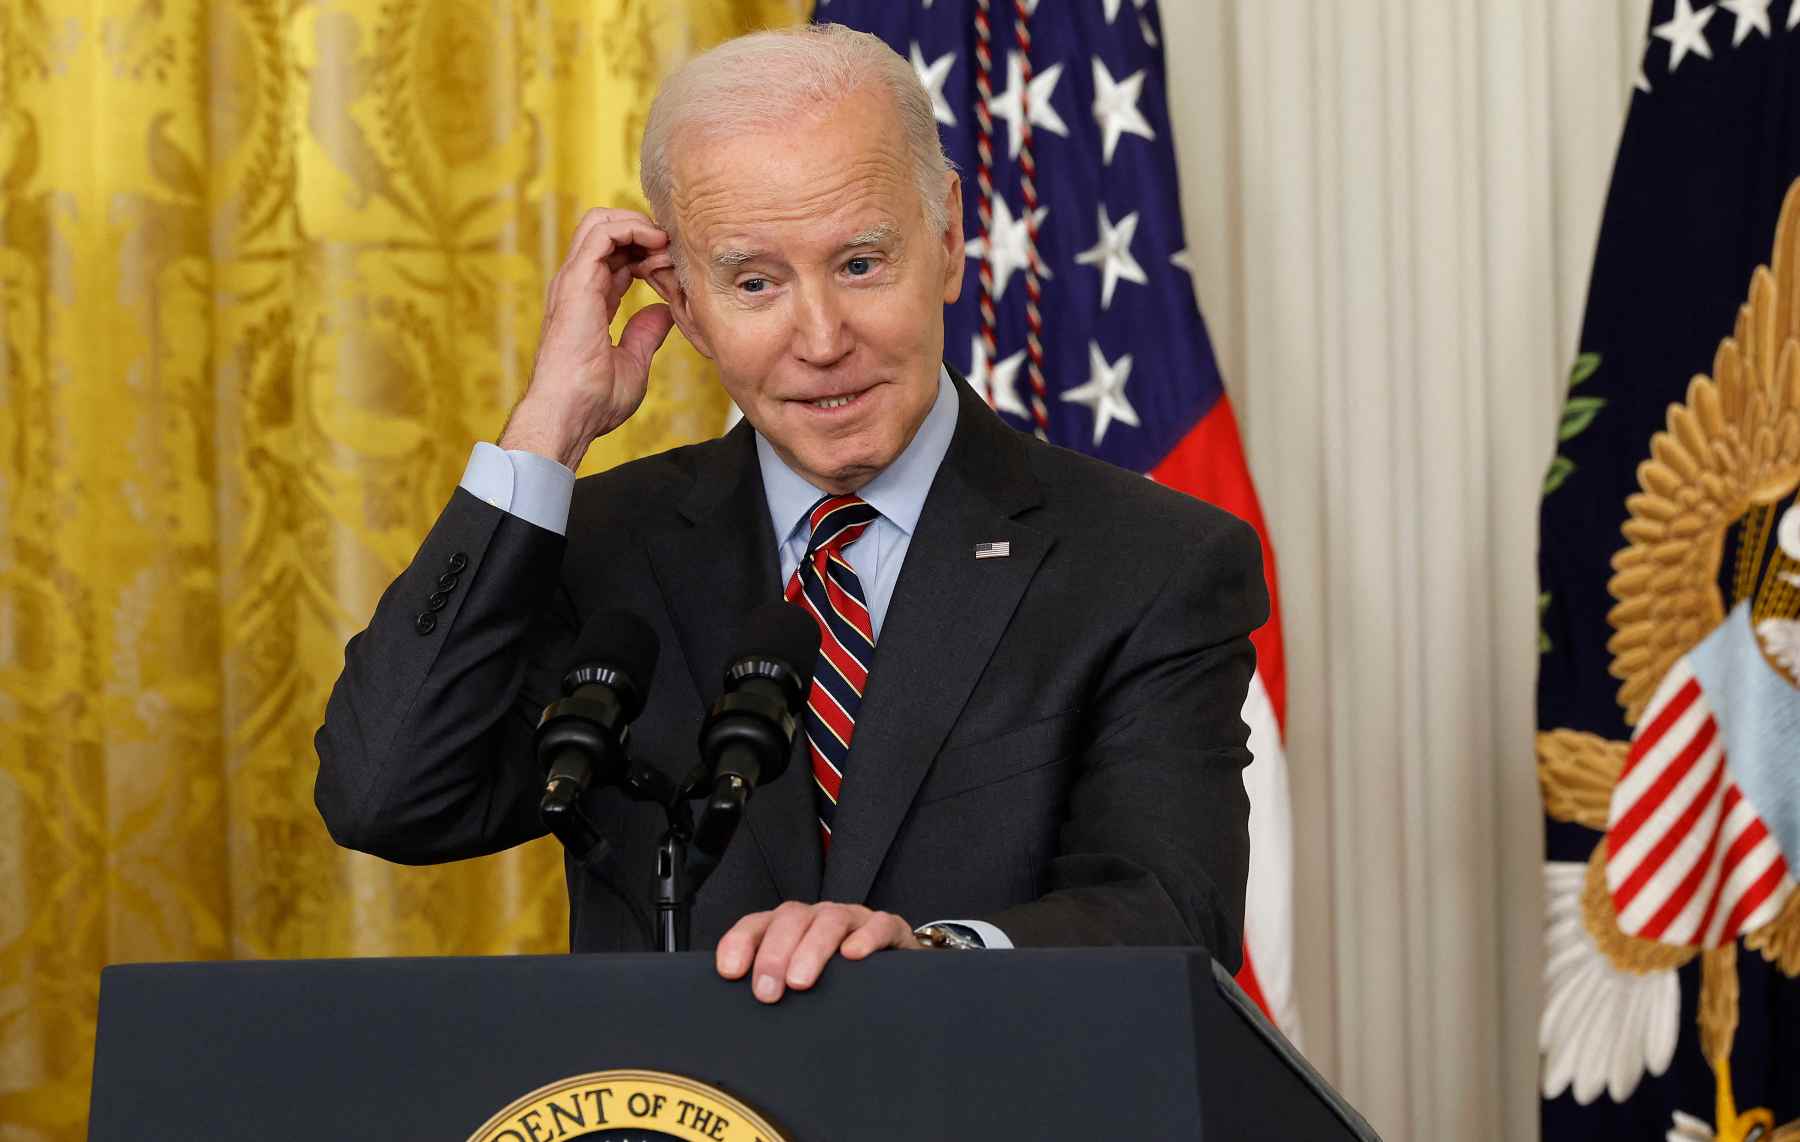 Biden signs the agreement to raise the US debt ceiling until 2025